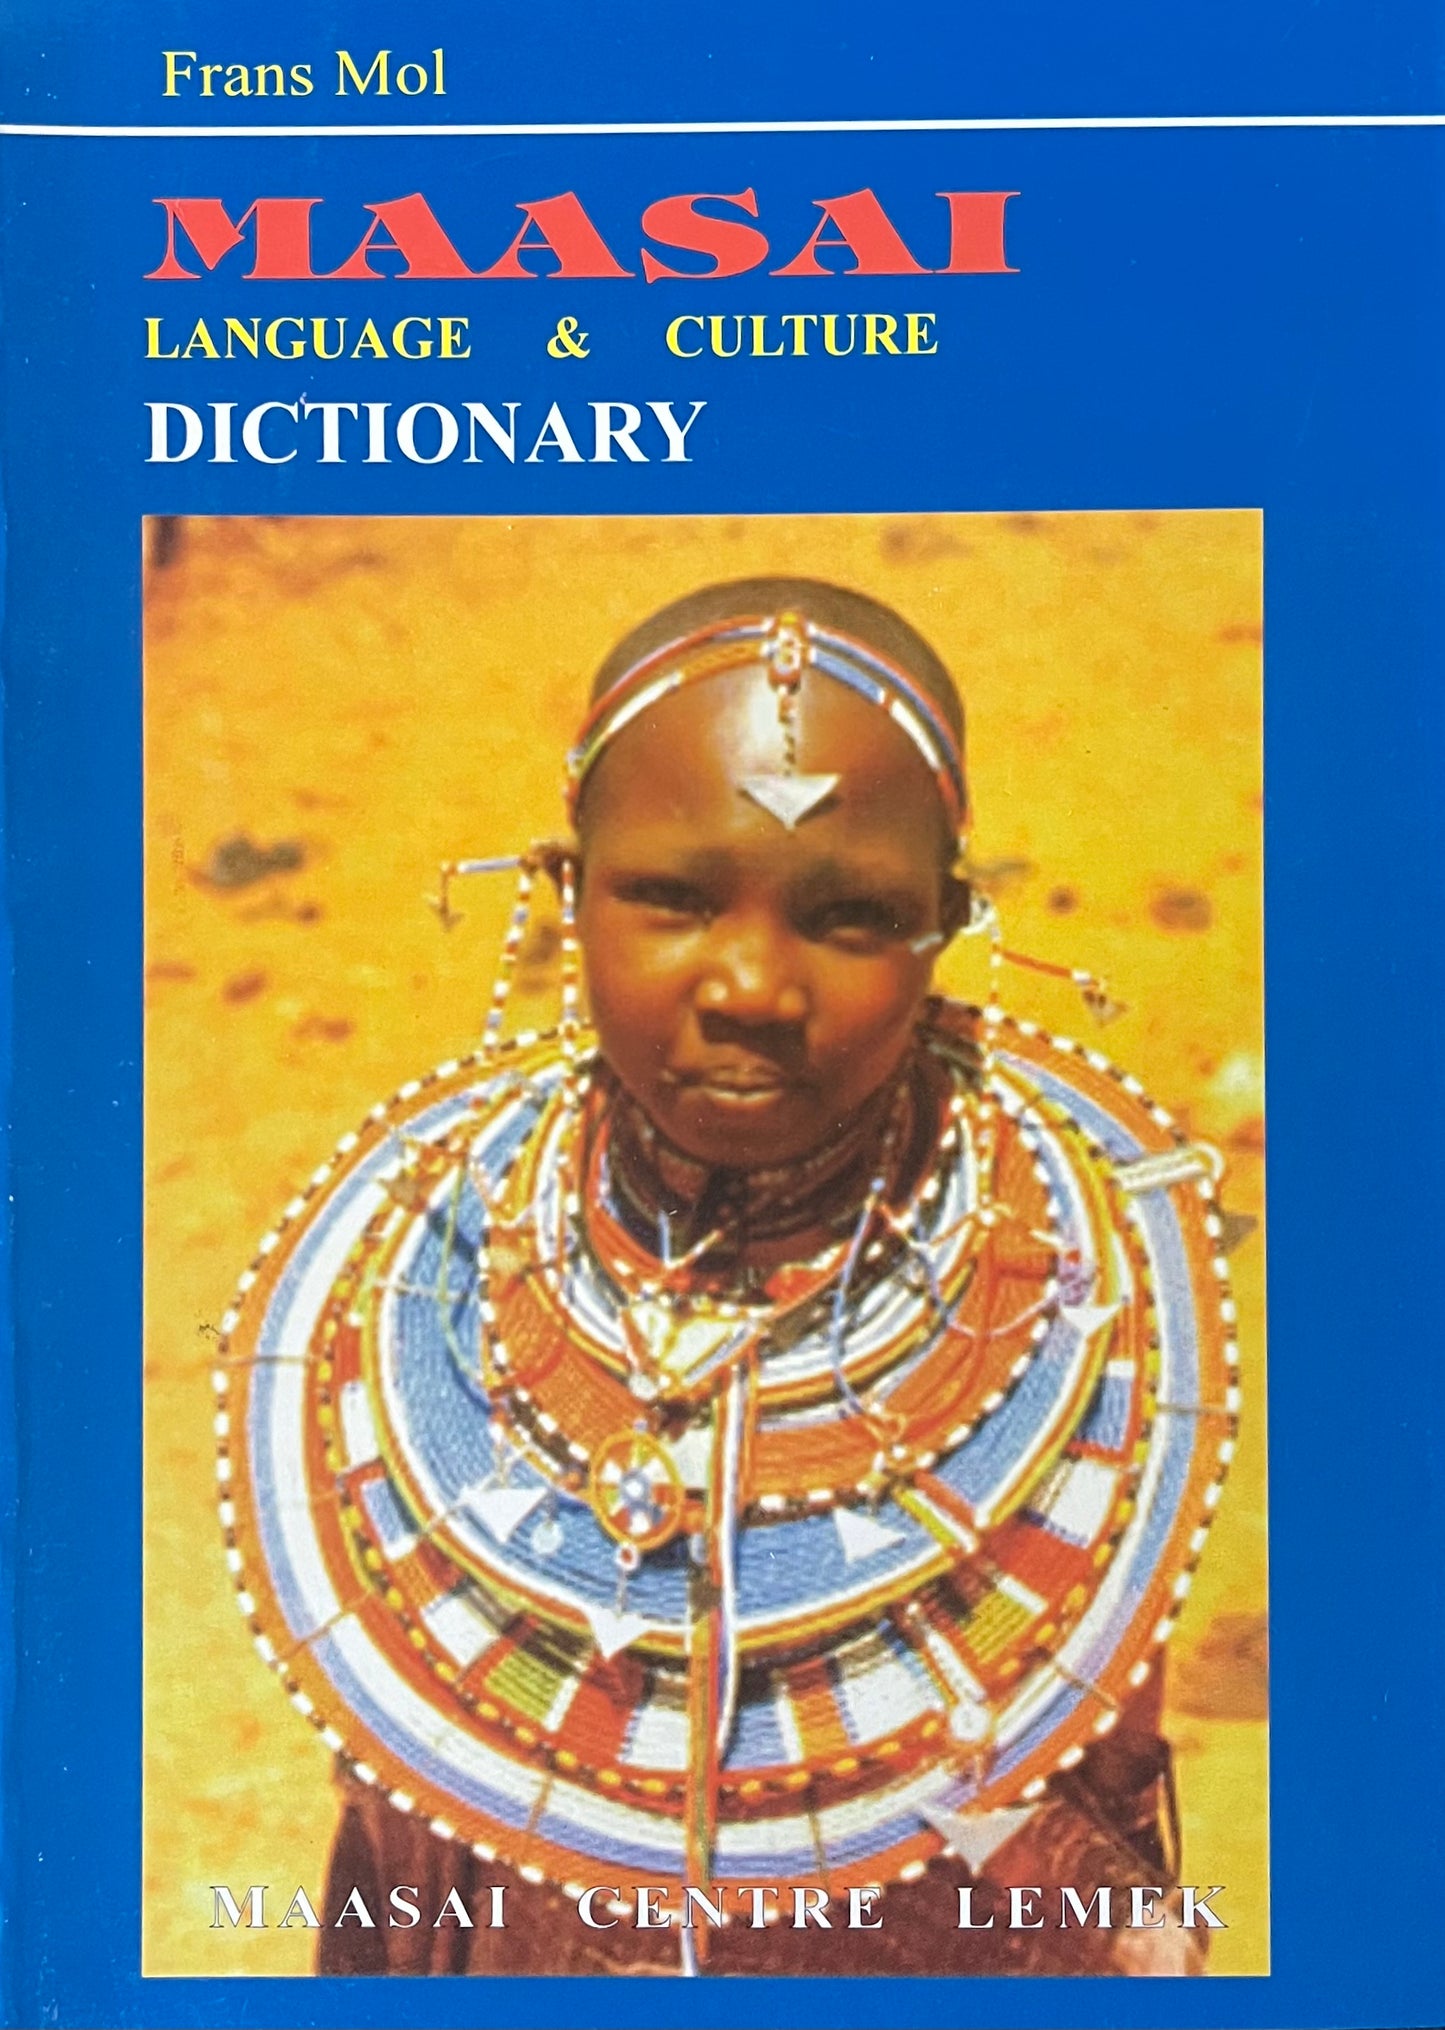 MAASAI LANGUAGE AND CULTURE By Frans Mol